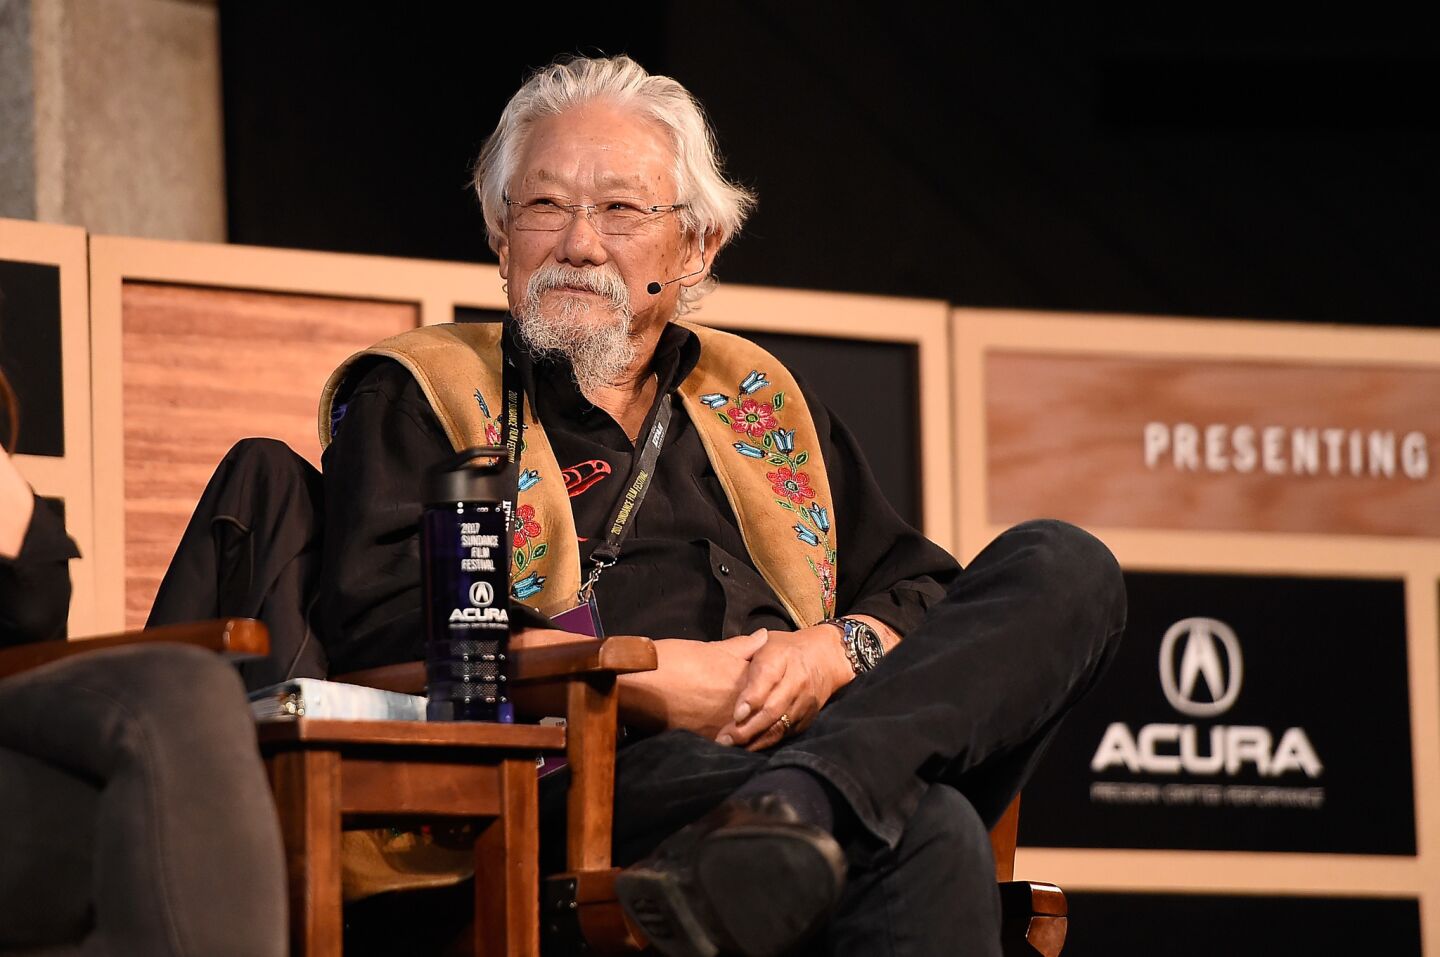 David Suzuki speaks on stage Jan. 22 at the New Climate Lunch Roundtable during the Sundance Film Festival in Park City, Utah.